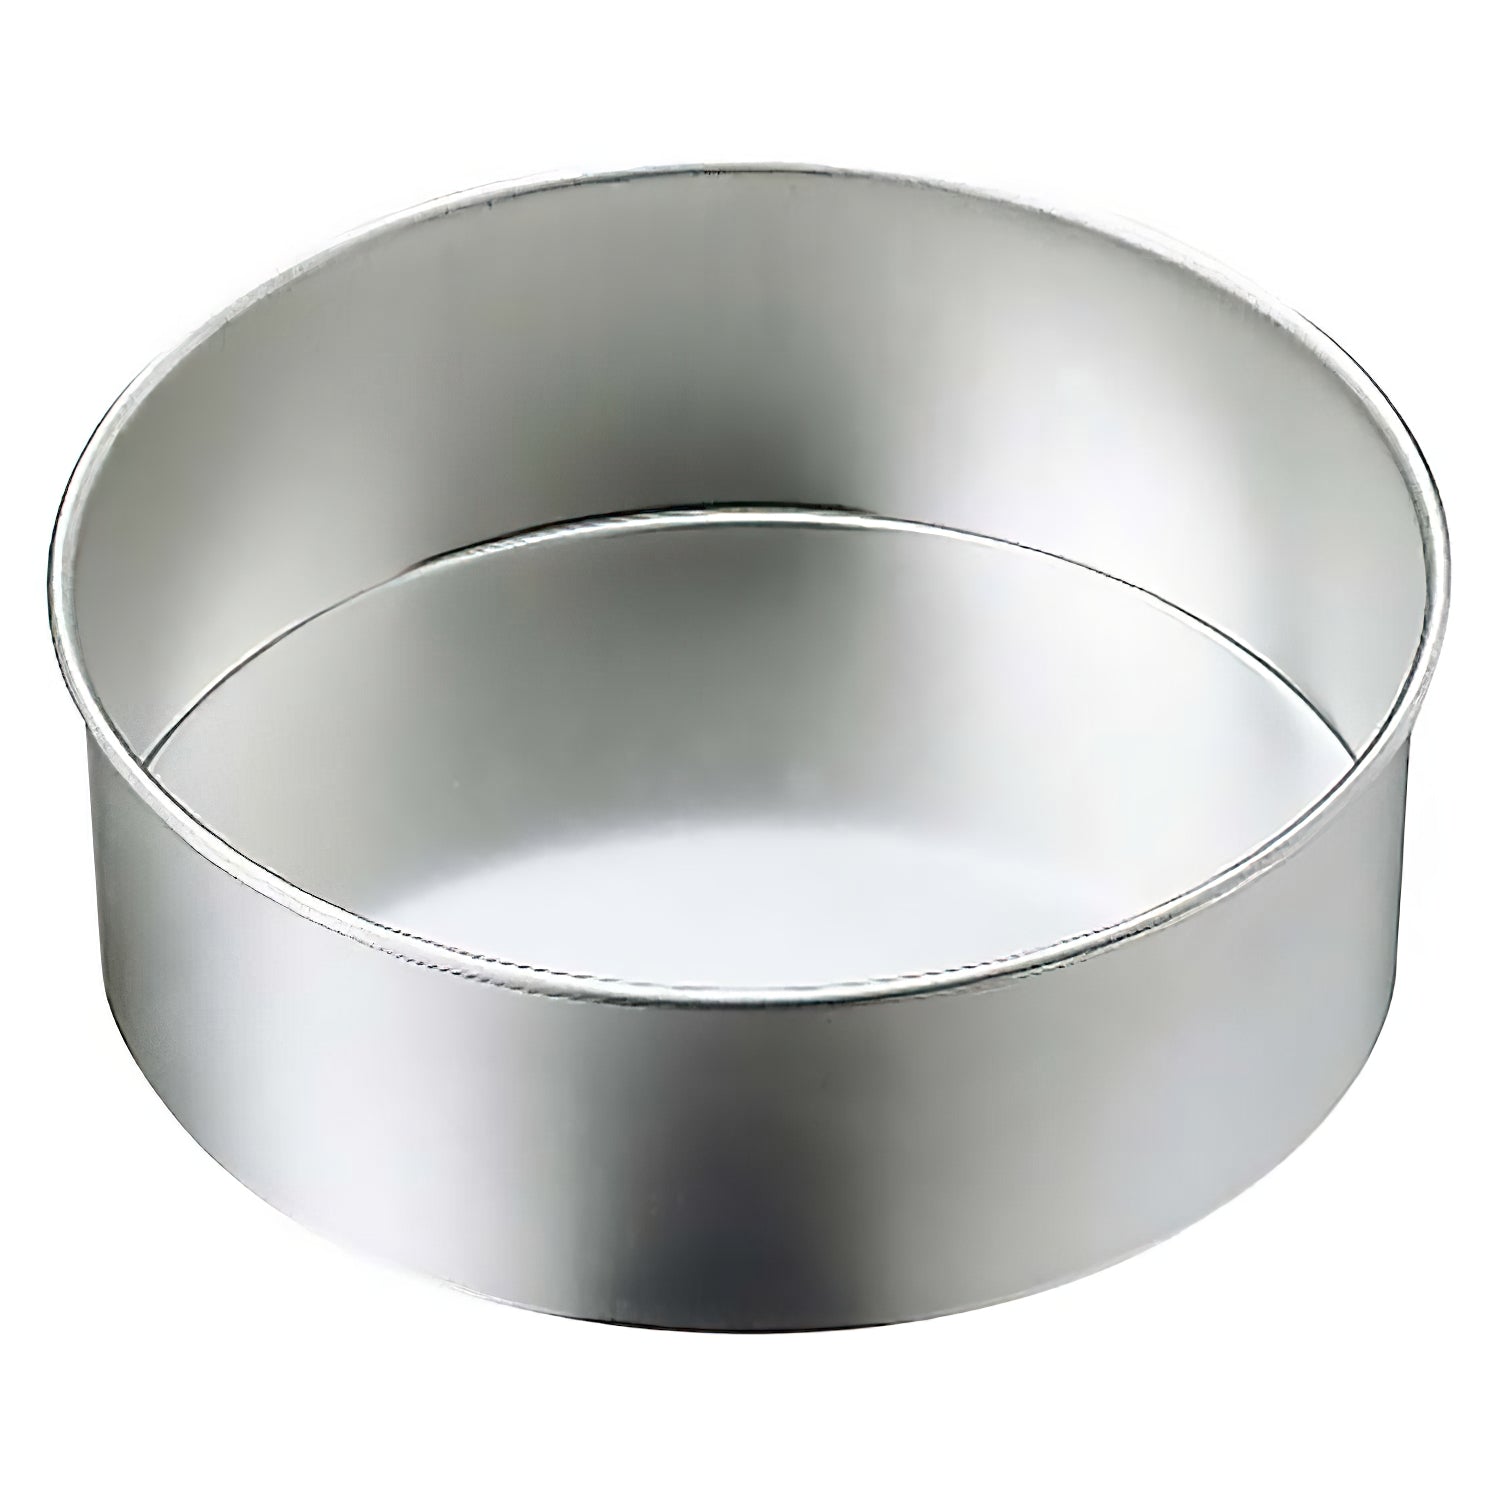 Ebm Alloy Steel Round Cake Pan 18cm - Durable and Versatile Baking Essential